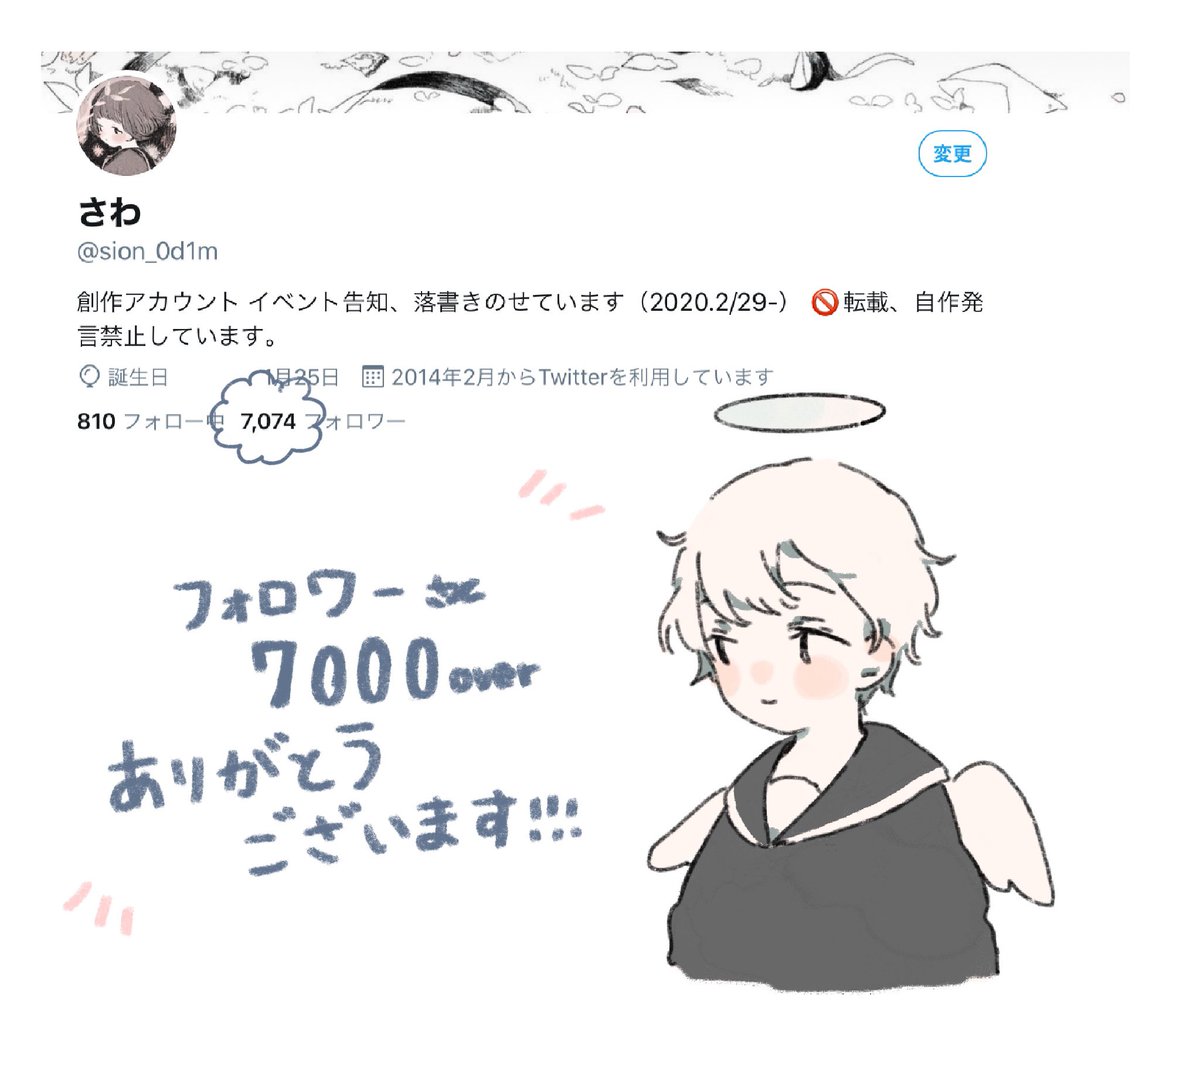 7000overありがとうございました?? 